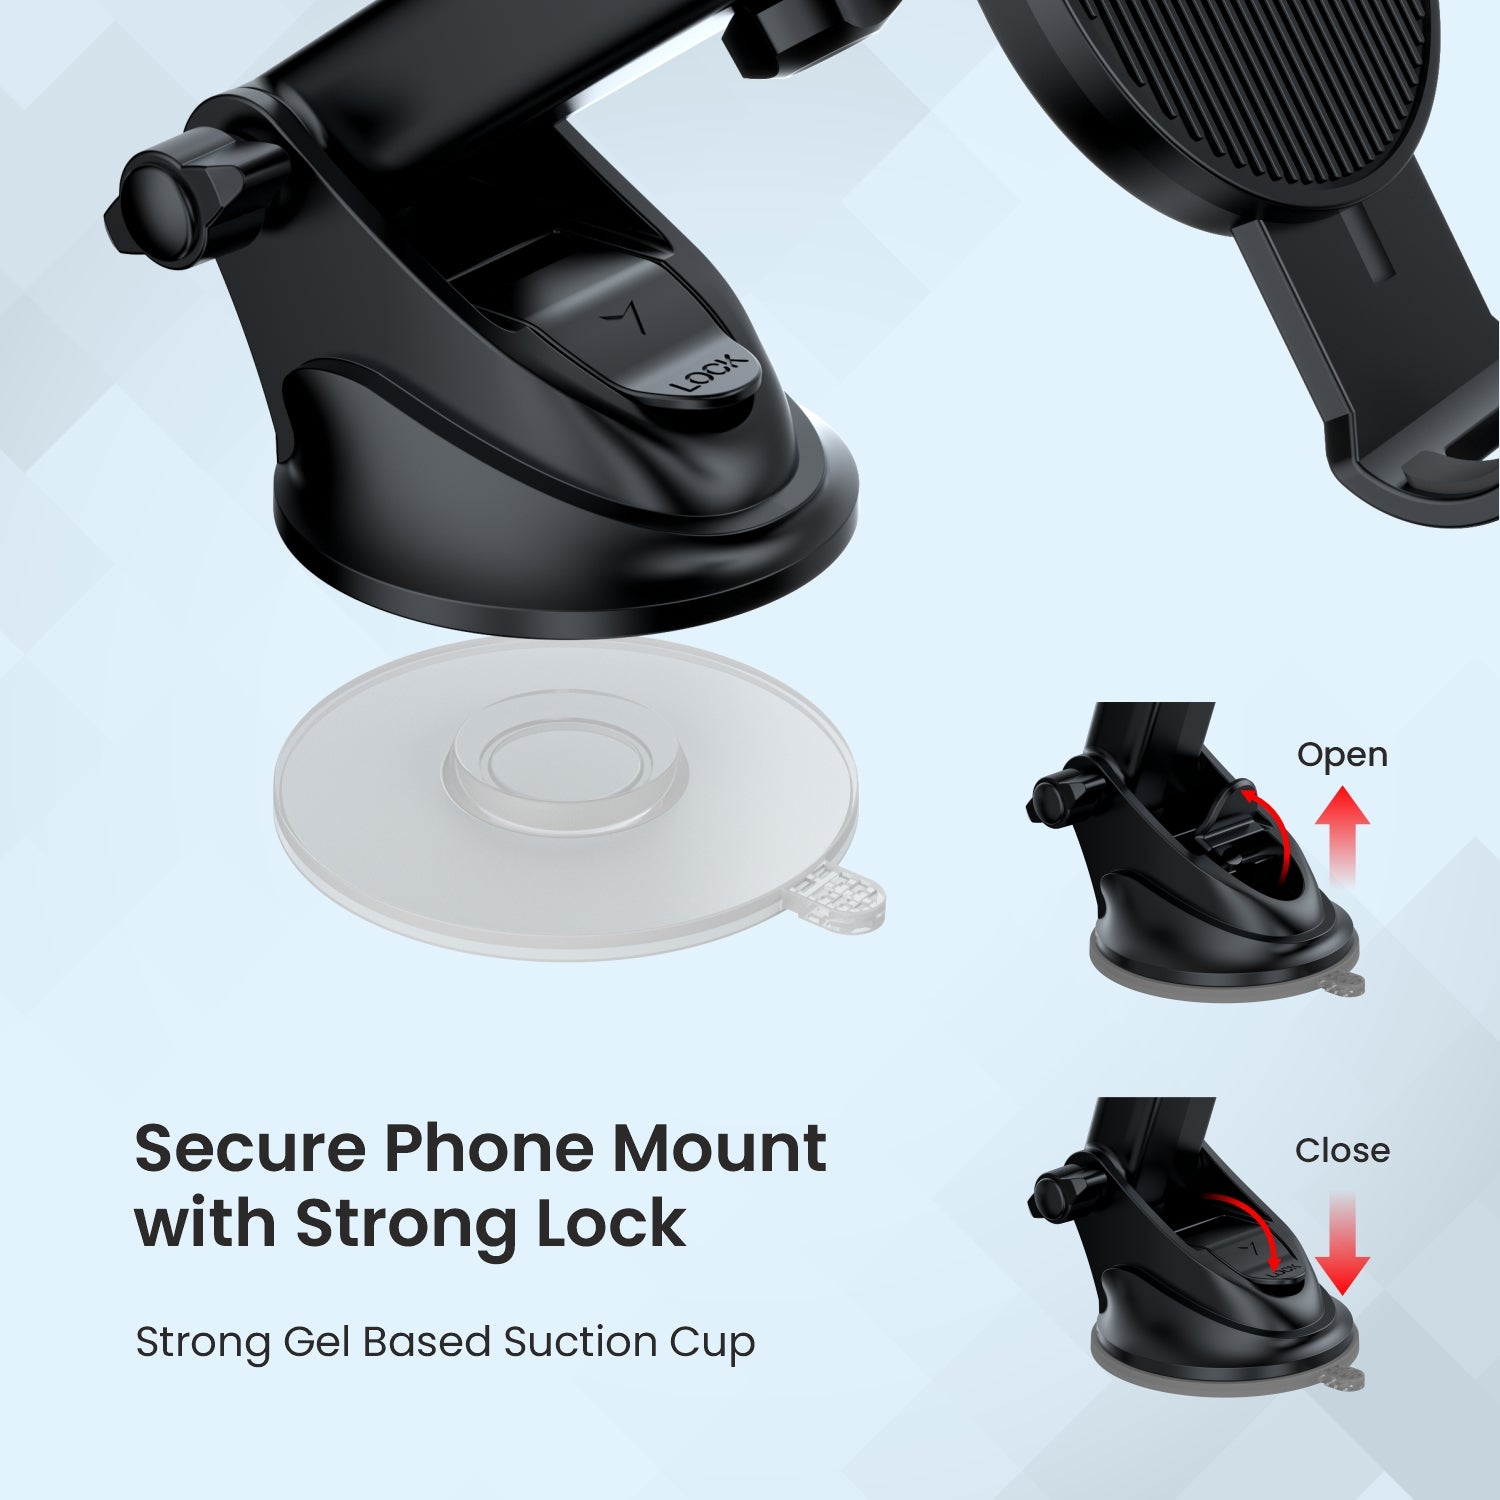 Black Portronics Clamp M3 car Smartphone holder with secure phone mount  and strong lock